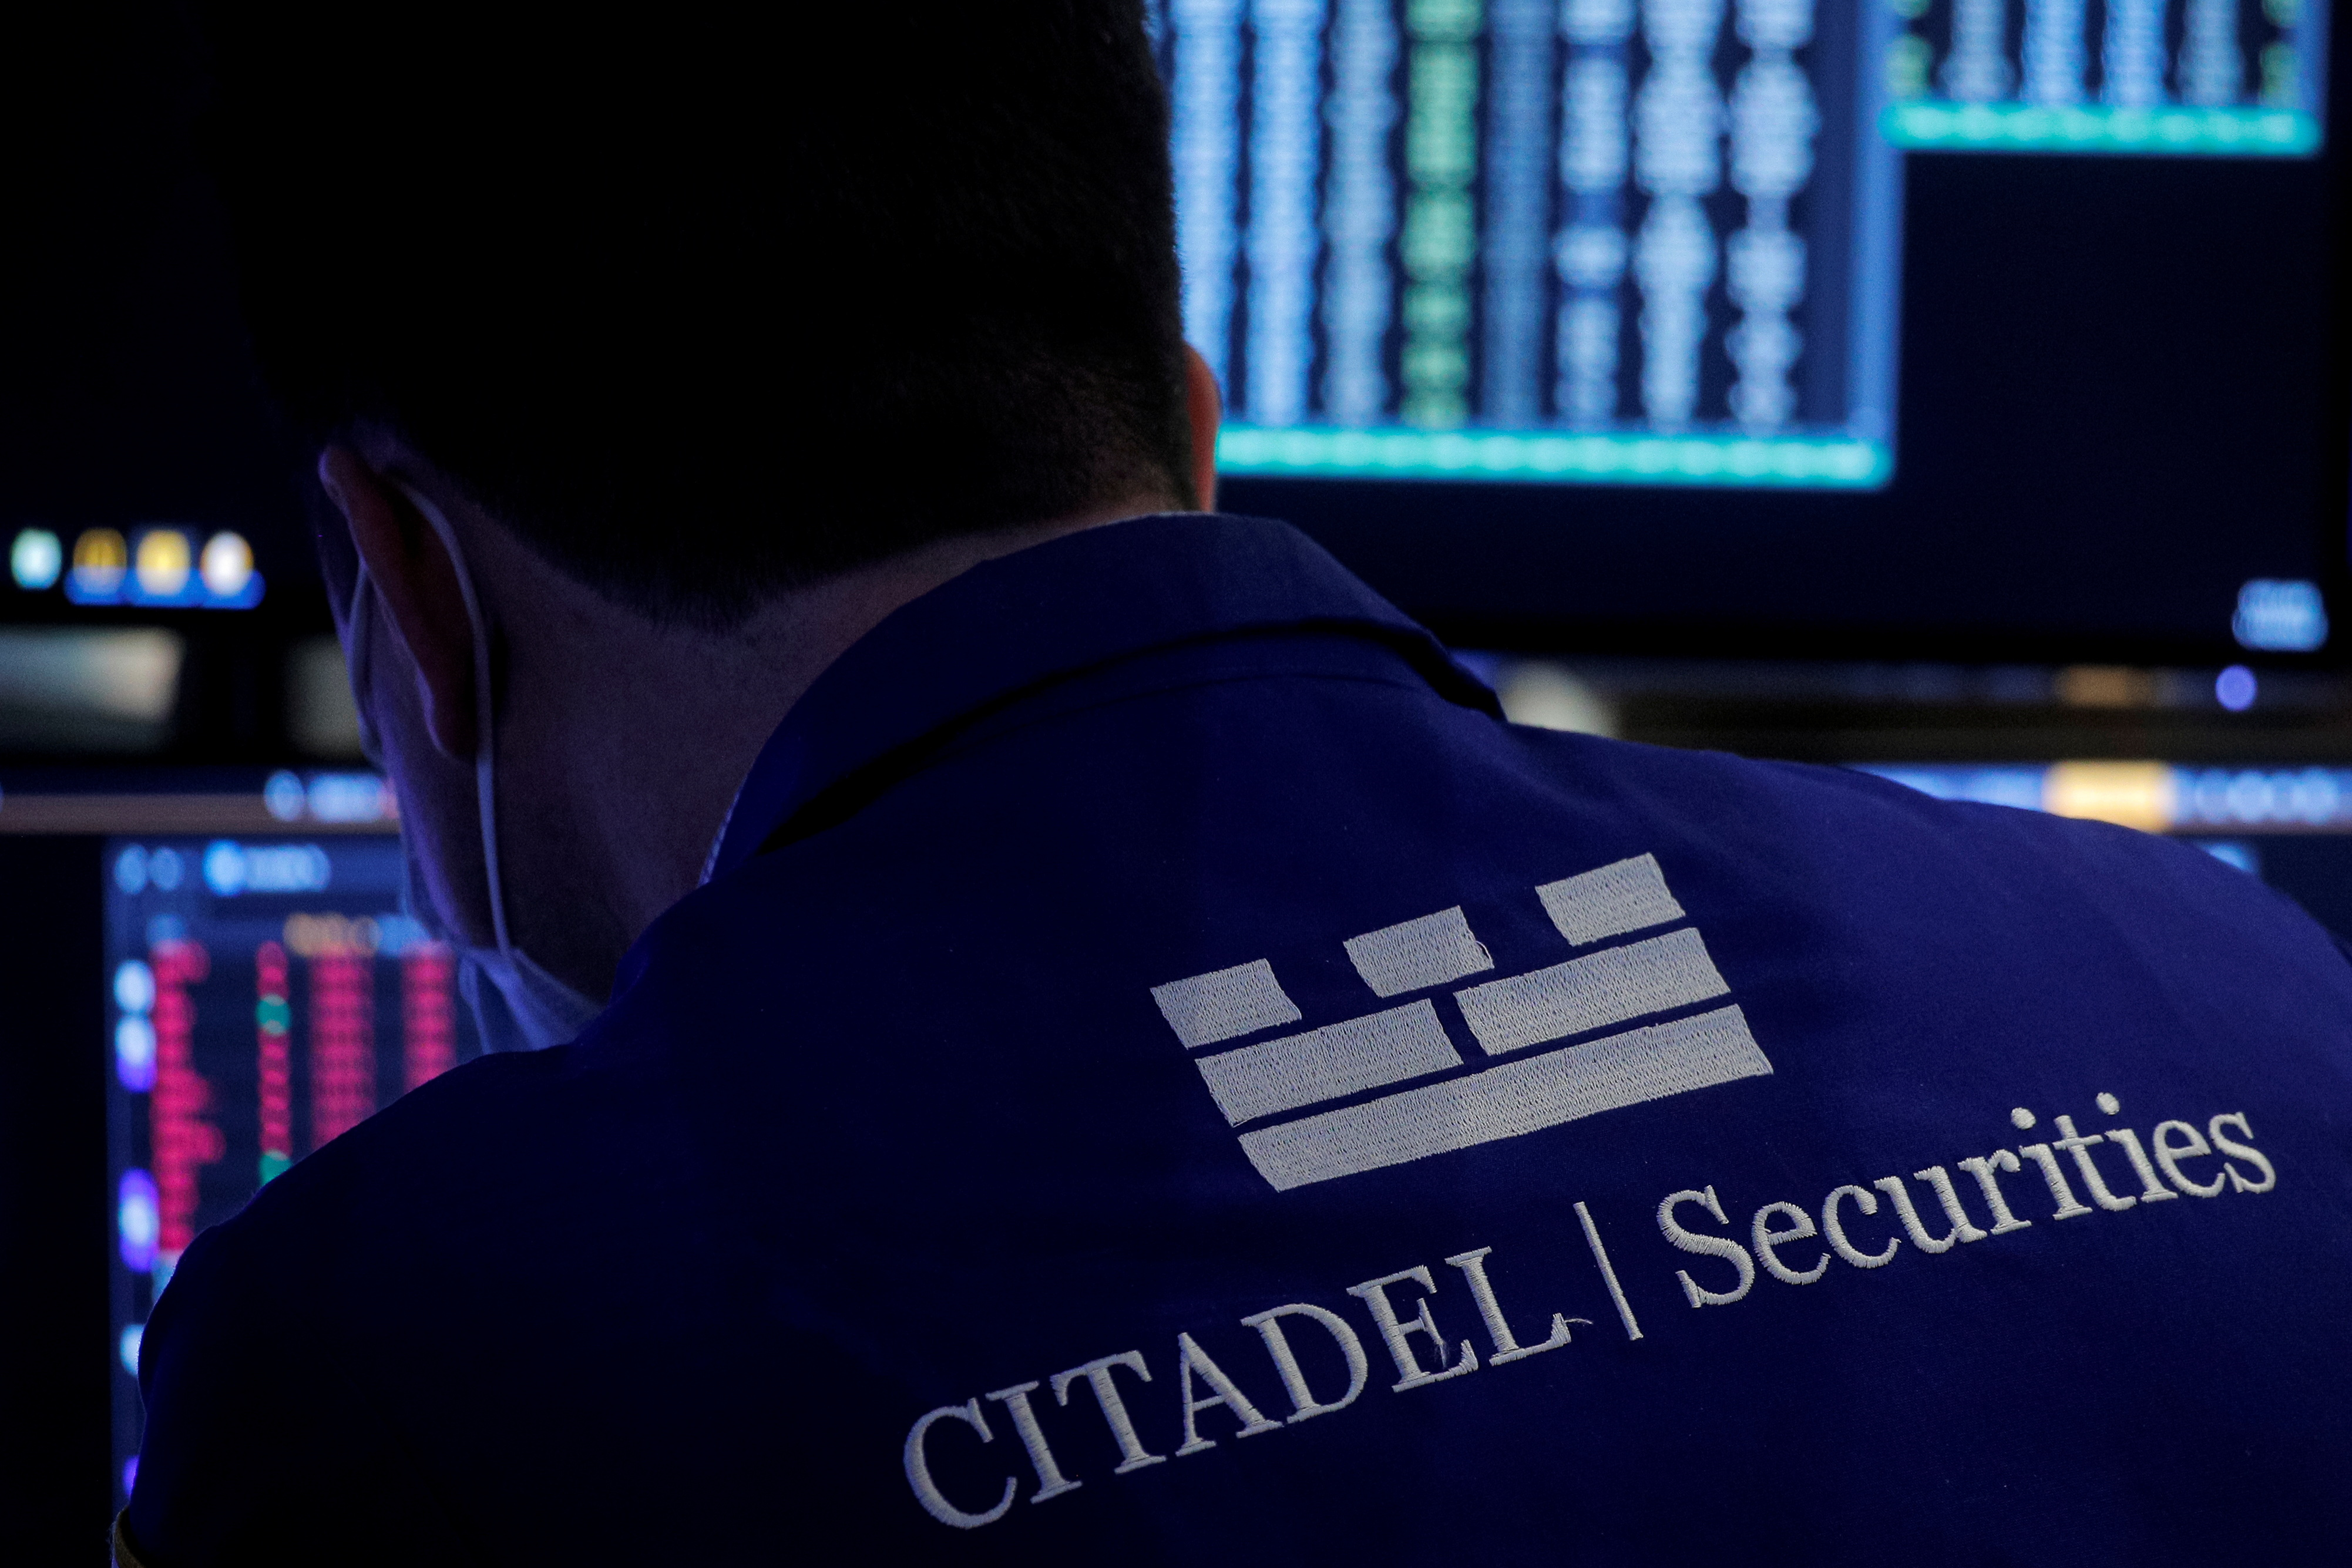 A trader works in the Citadel Securities booth on the floor of the NYSE in New York